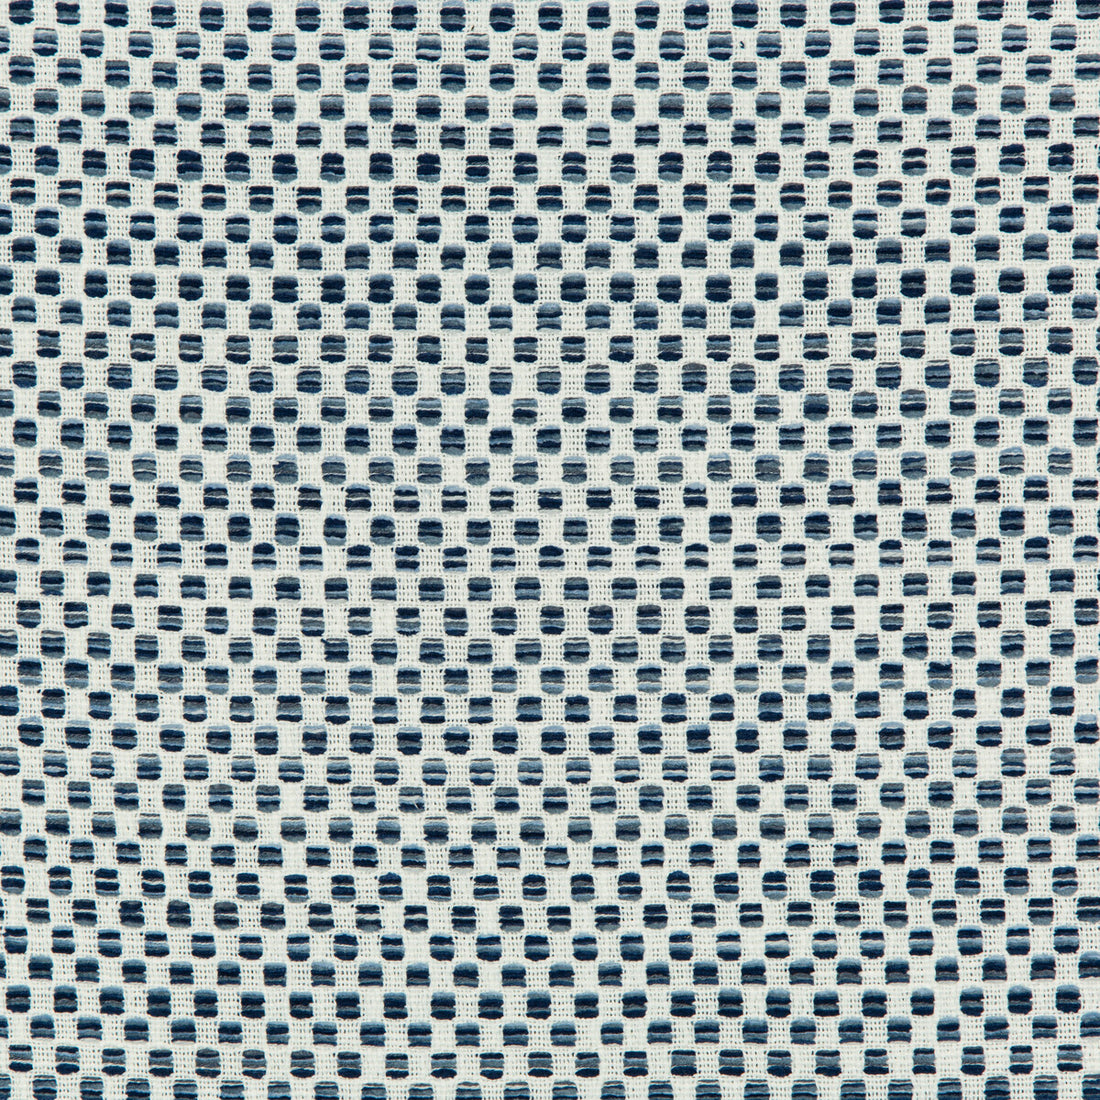 Kravet Design fabric in 36090-51 color - pattern 36090.51.0 - by Kravet Design in the Inside Out Performance Fabrics collection